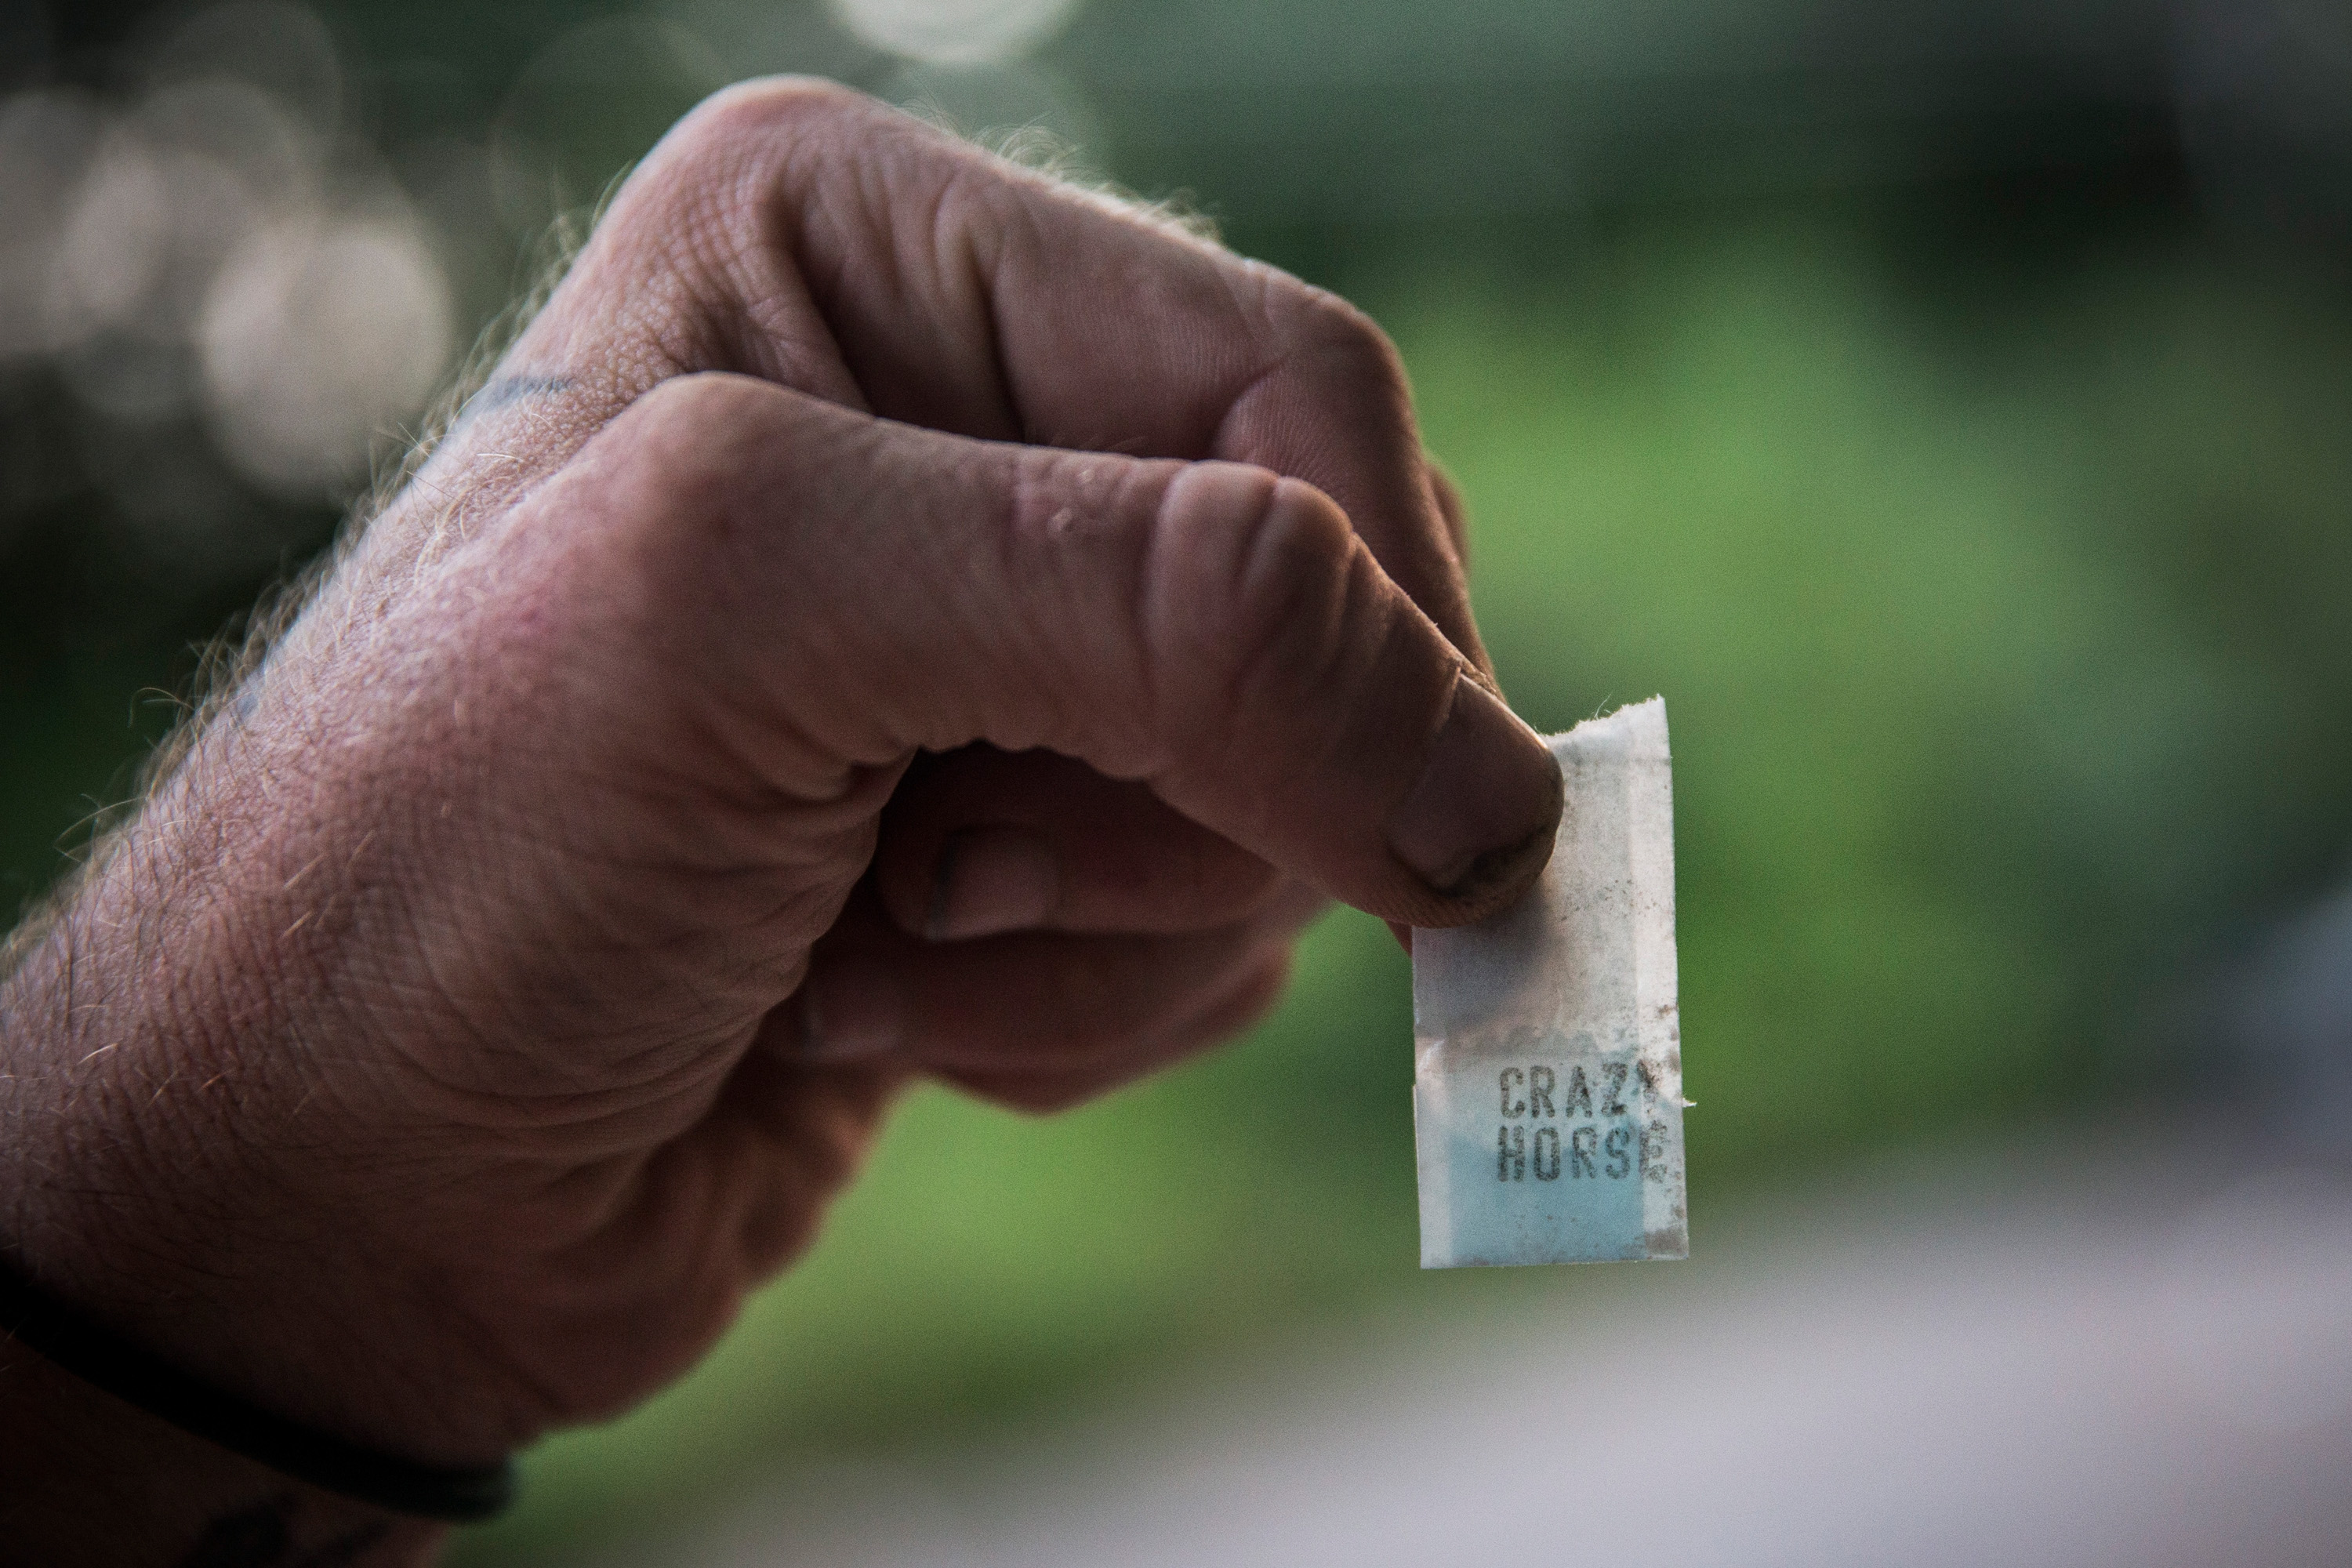 A man holds a bag of heroin labeled "Crazy Horse" in Camden, N.J., Aug. 21, 2013. (Andrew Burton / Getty Images)